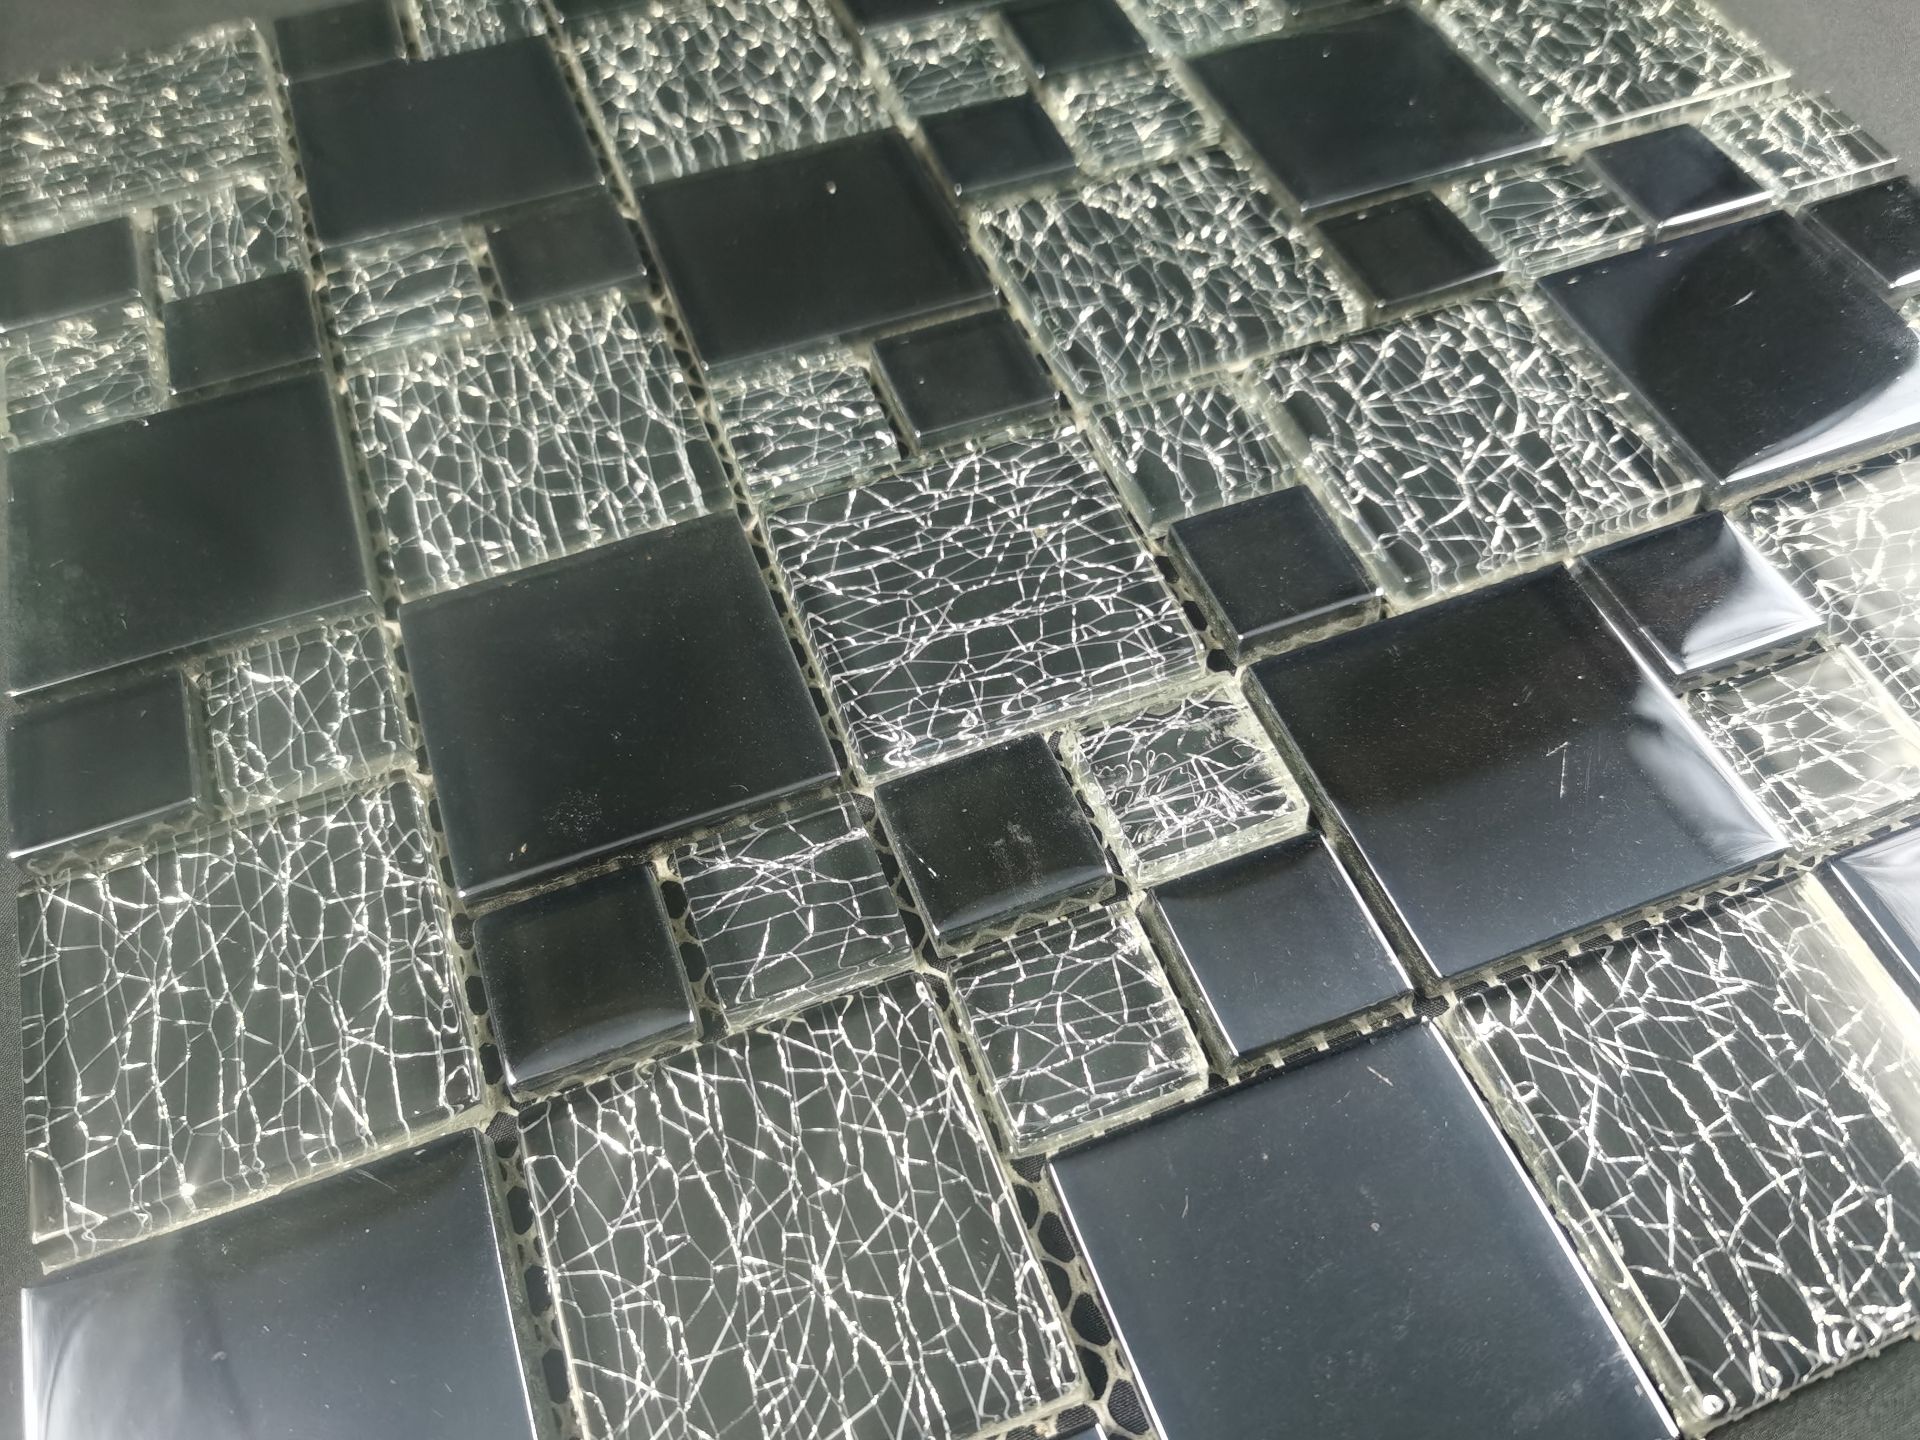 1 Square Metres- High Quality Glass Mosaic Tiles -- Super Saver 300*300*6mm* 11 sheets - Image 2 of 5